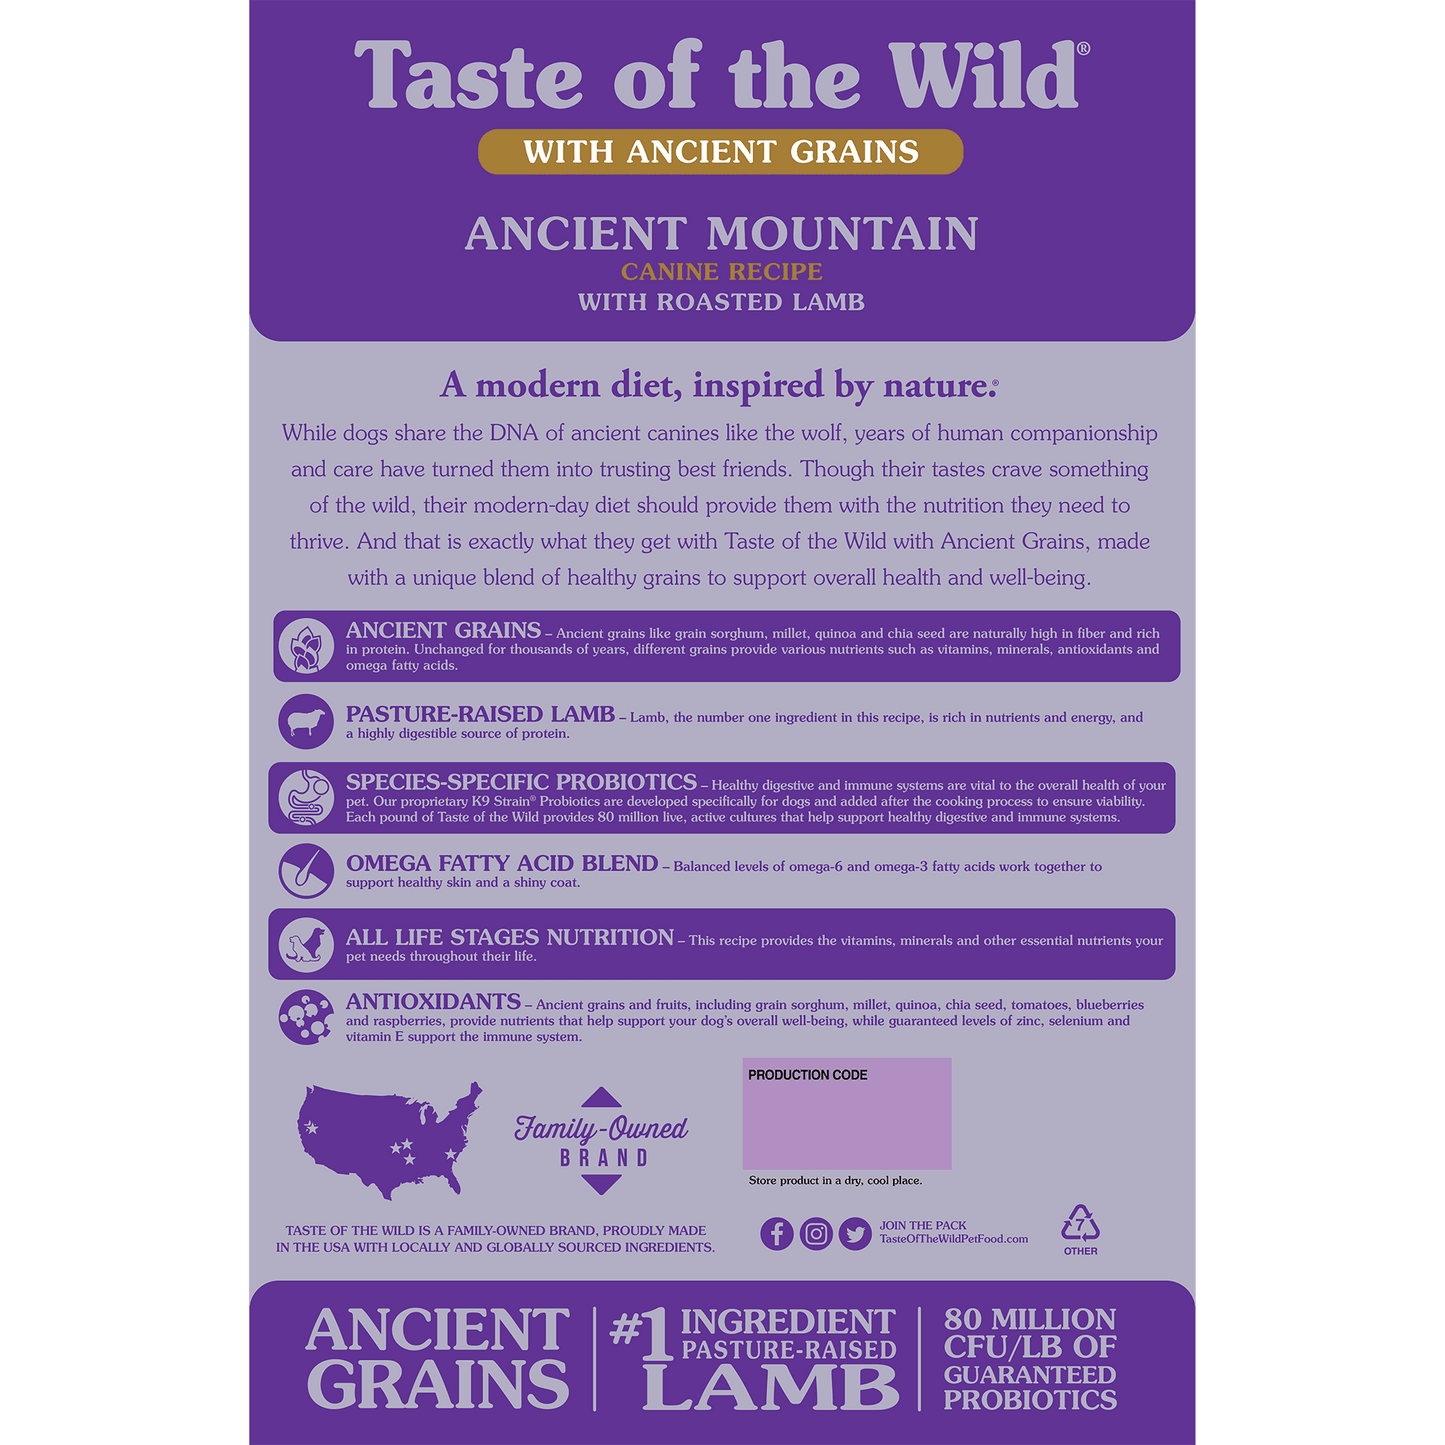 Taste of the Wild Ancient Mountain Canine Recipe for Dogs